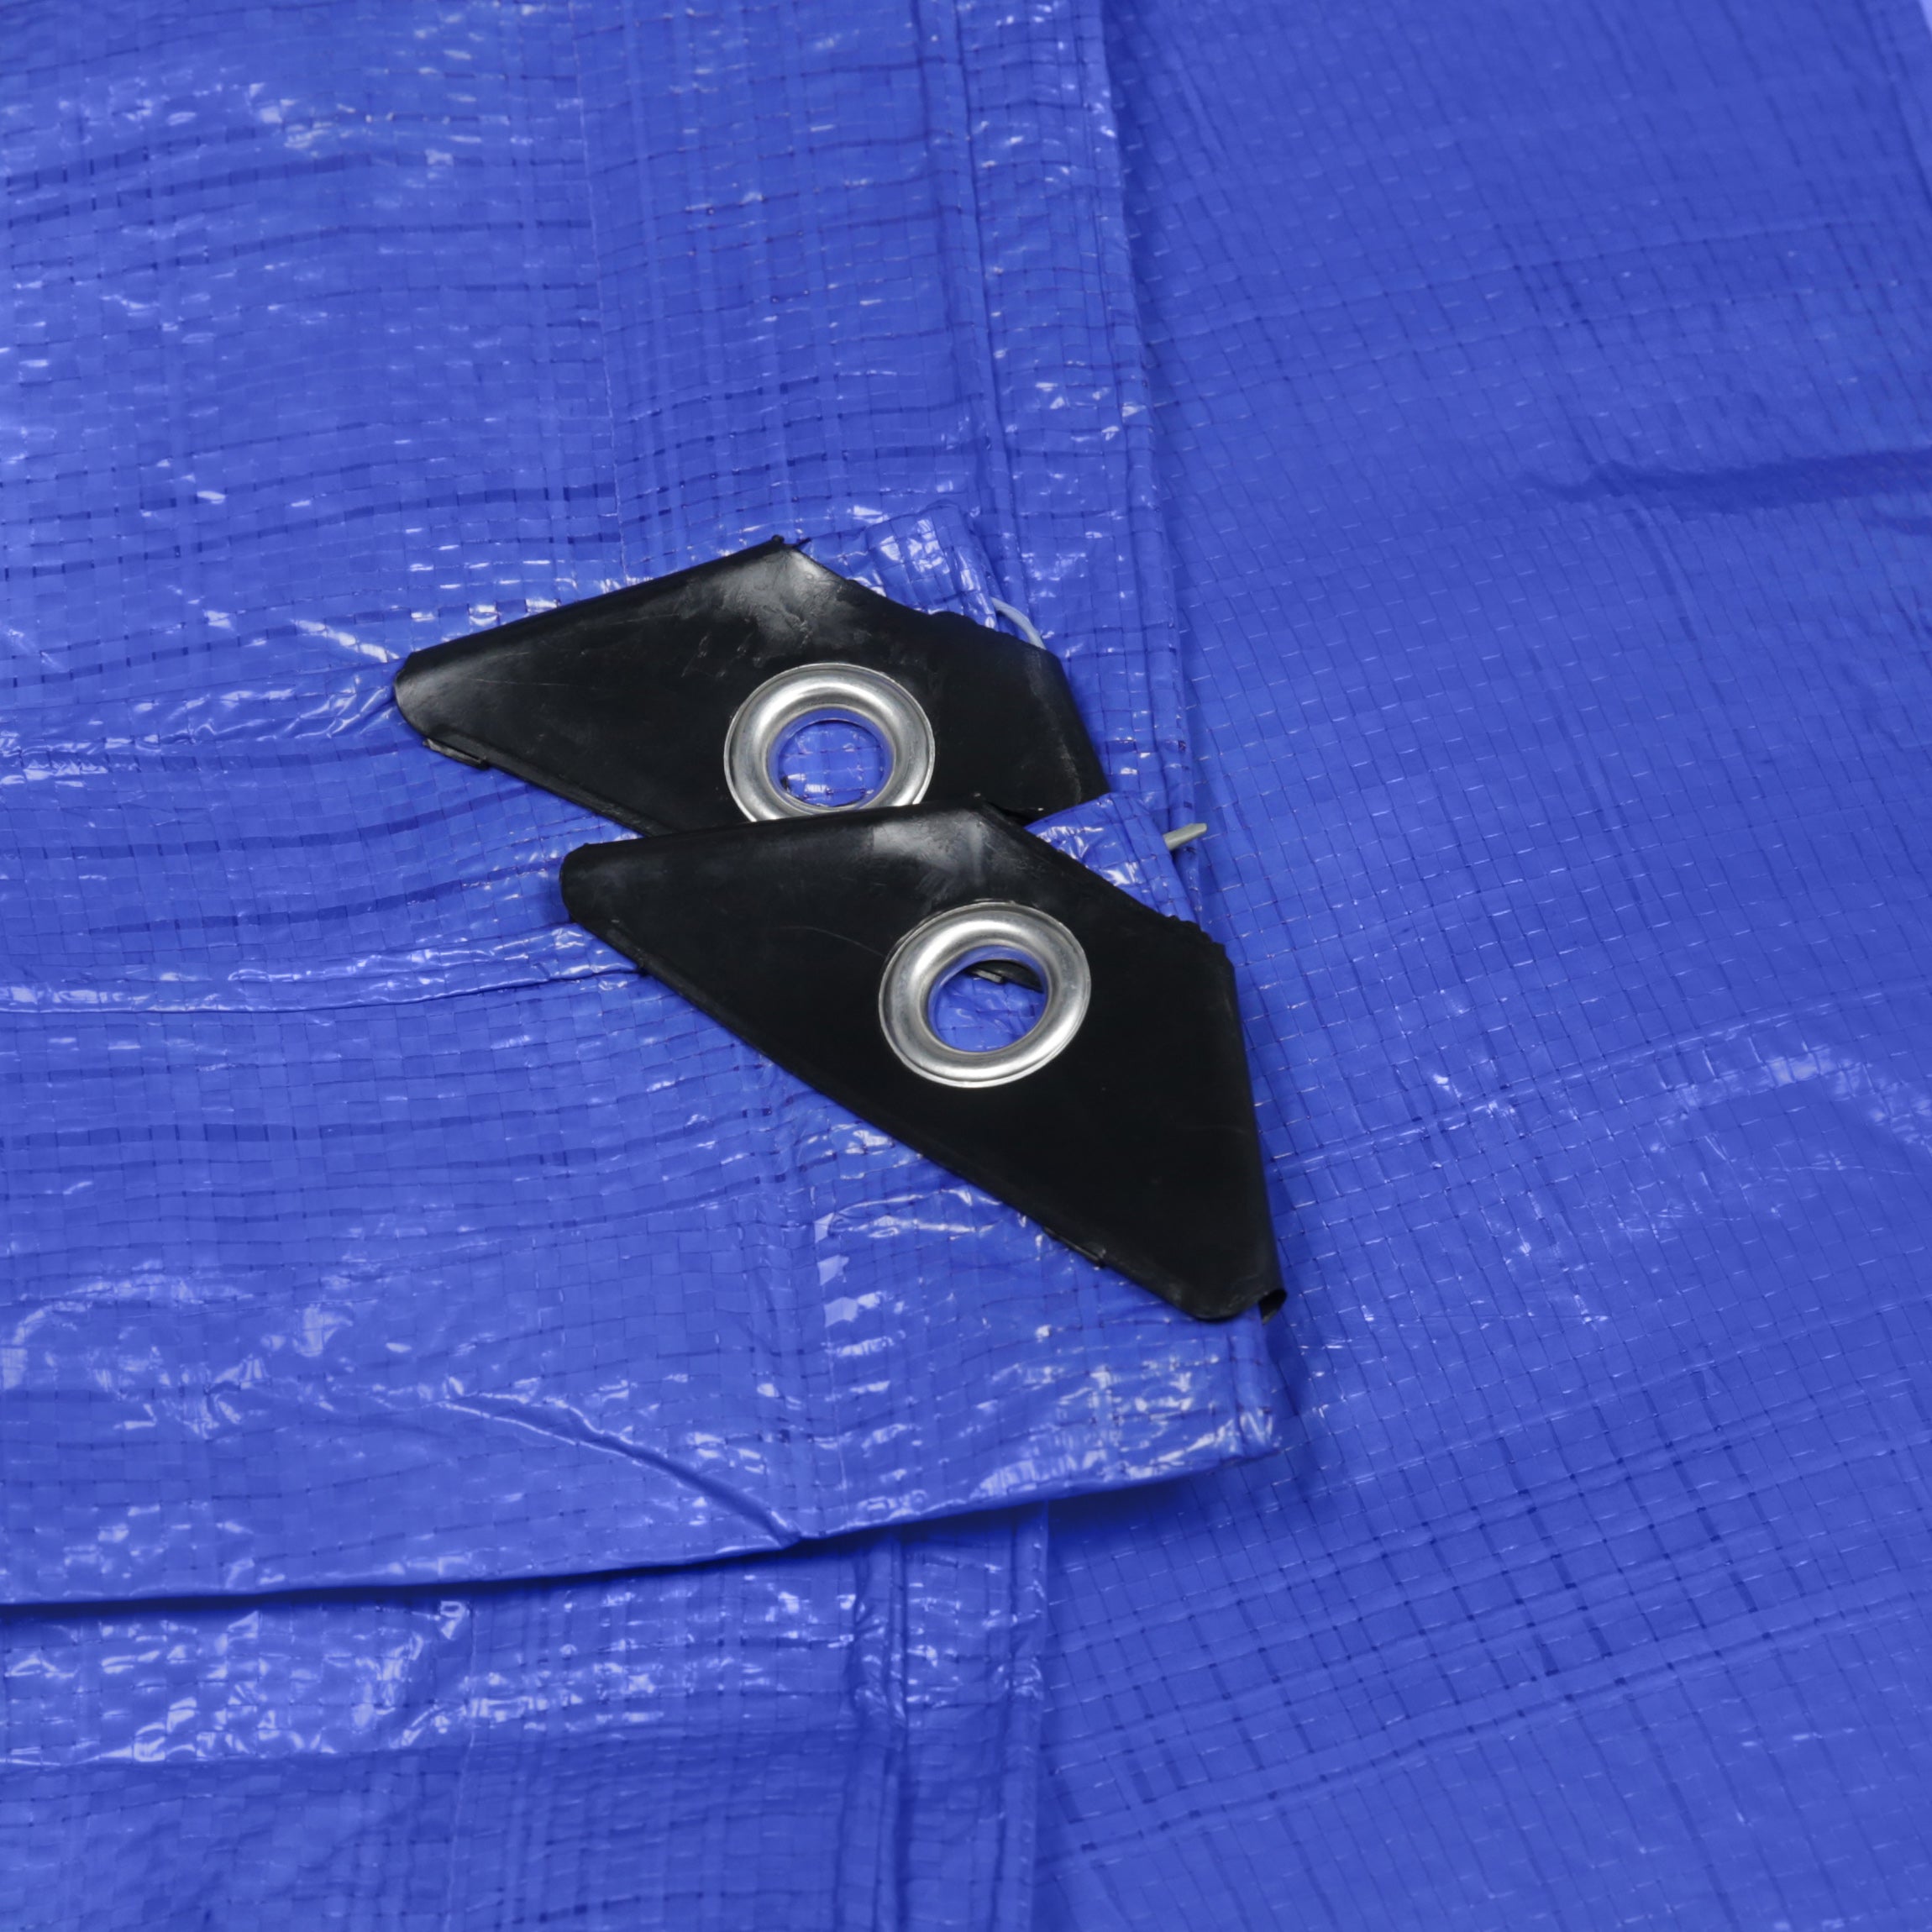 Super Covers Heavy Duty Tarpaulin 90gsm Blue - Various Sizes Available